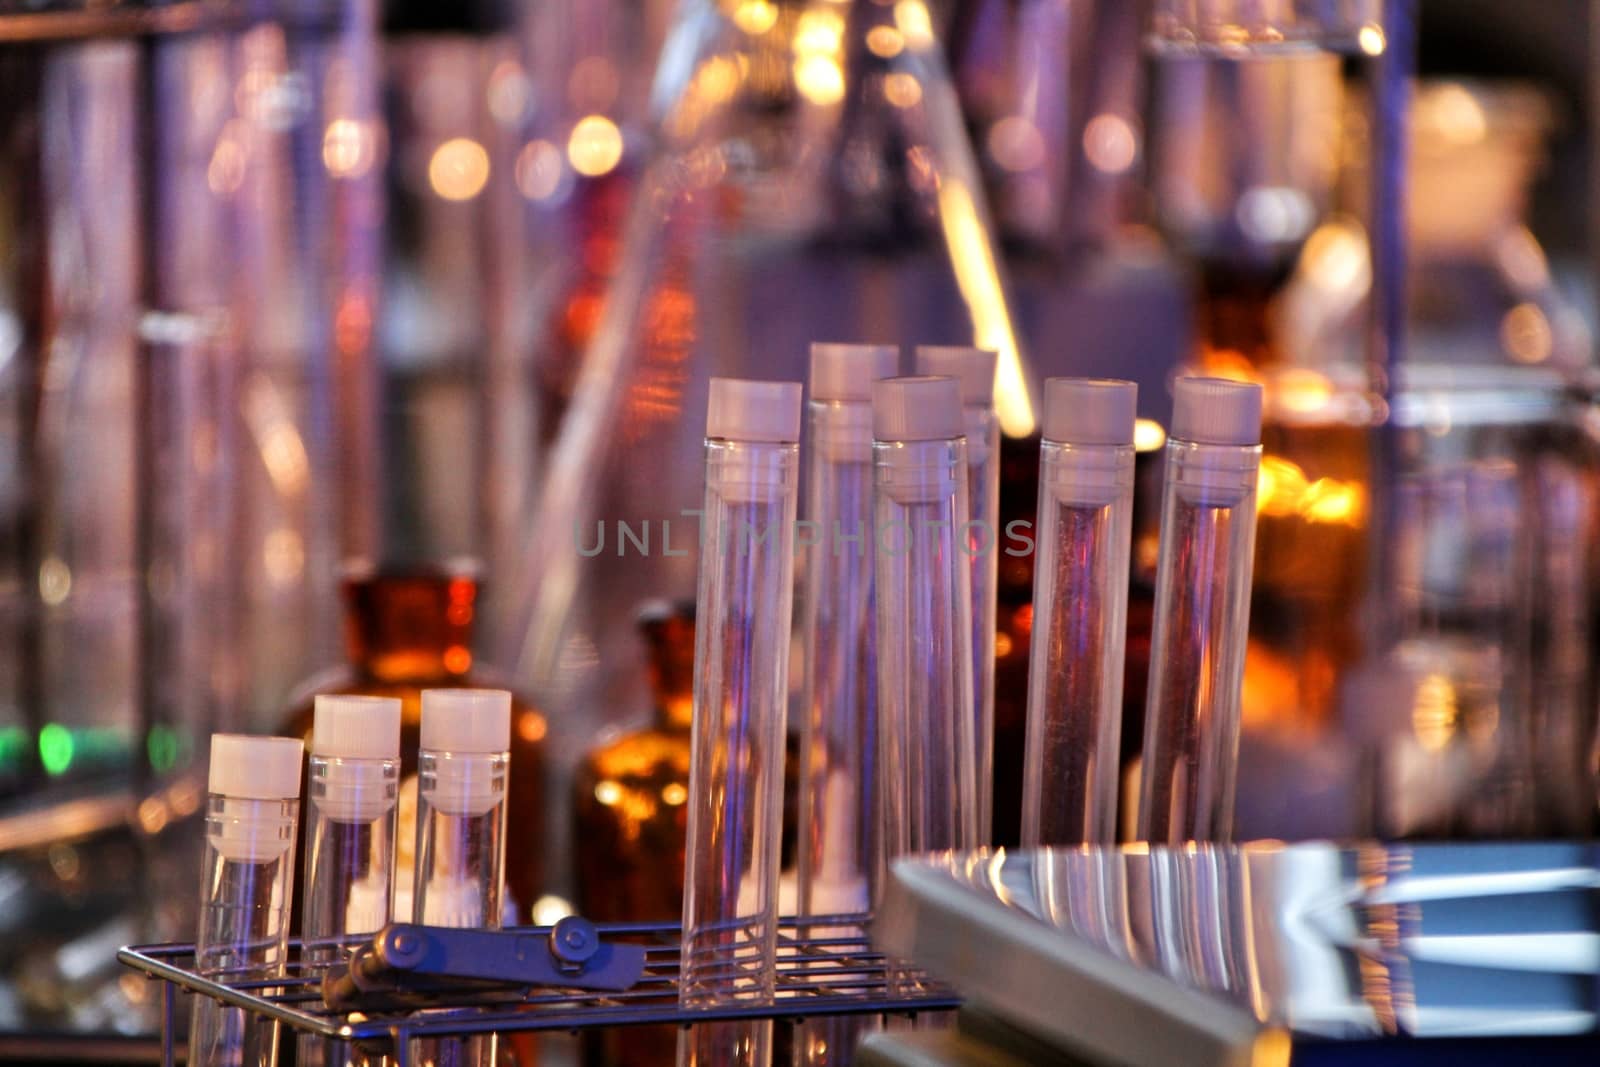 Test tubes and pots in a laboratory in Spain by soniabonet